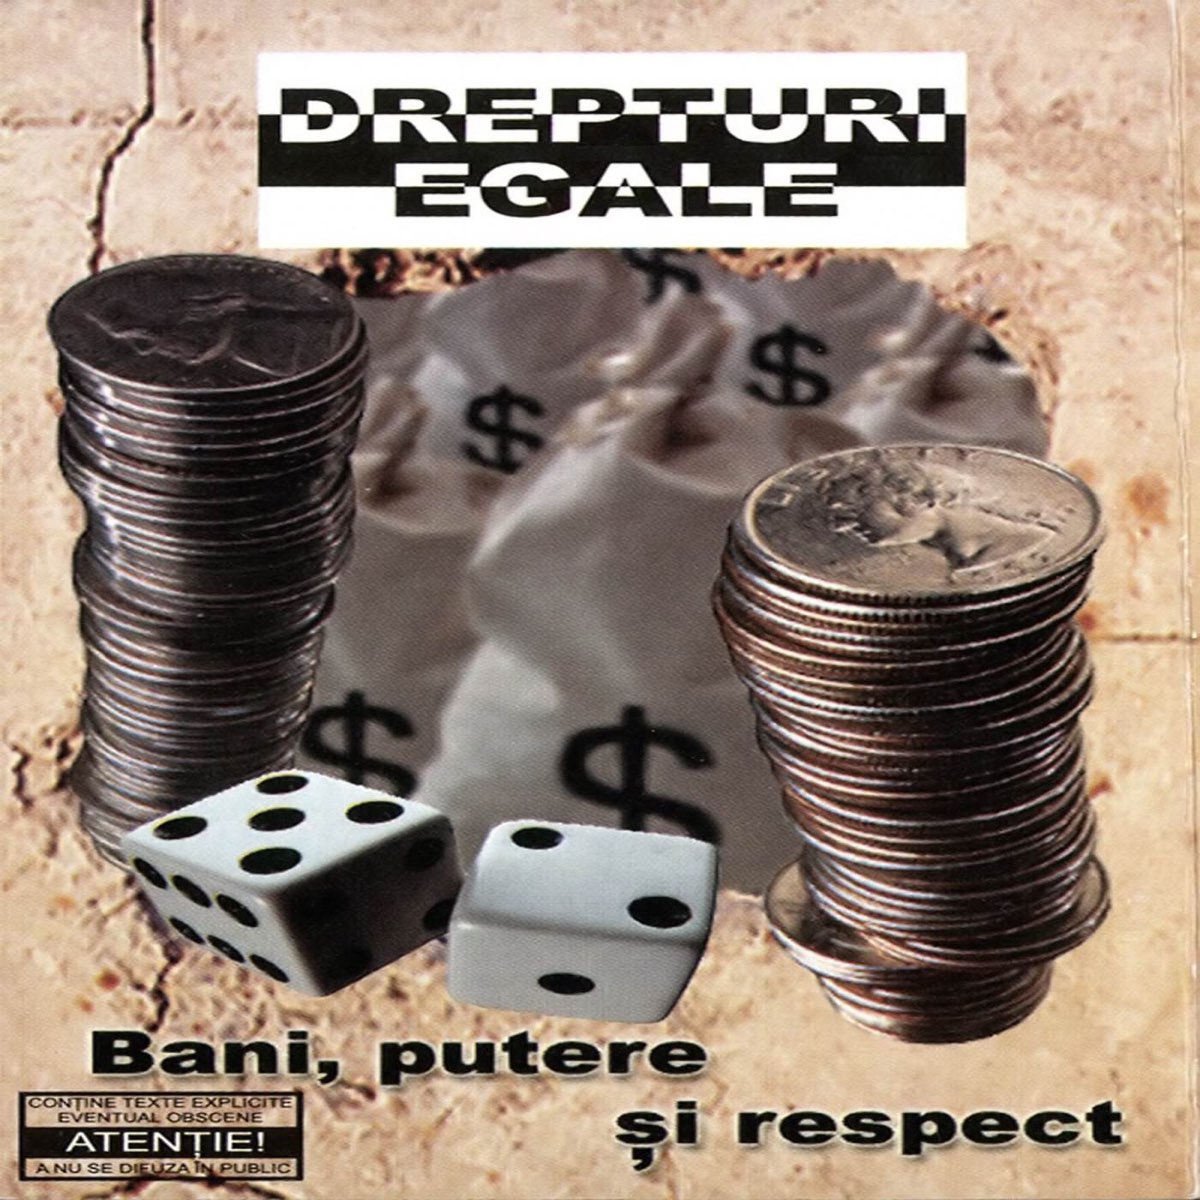 Bani Putere Si Respect by Drepturi Egale on Apple Music